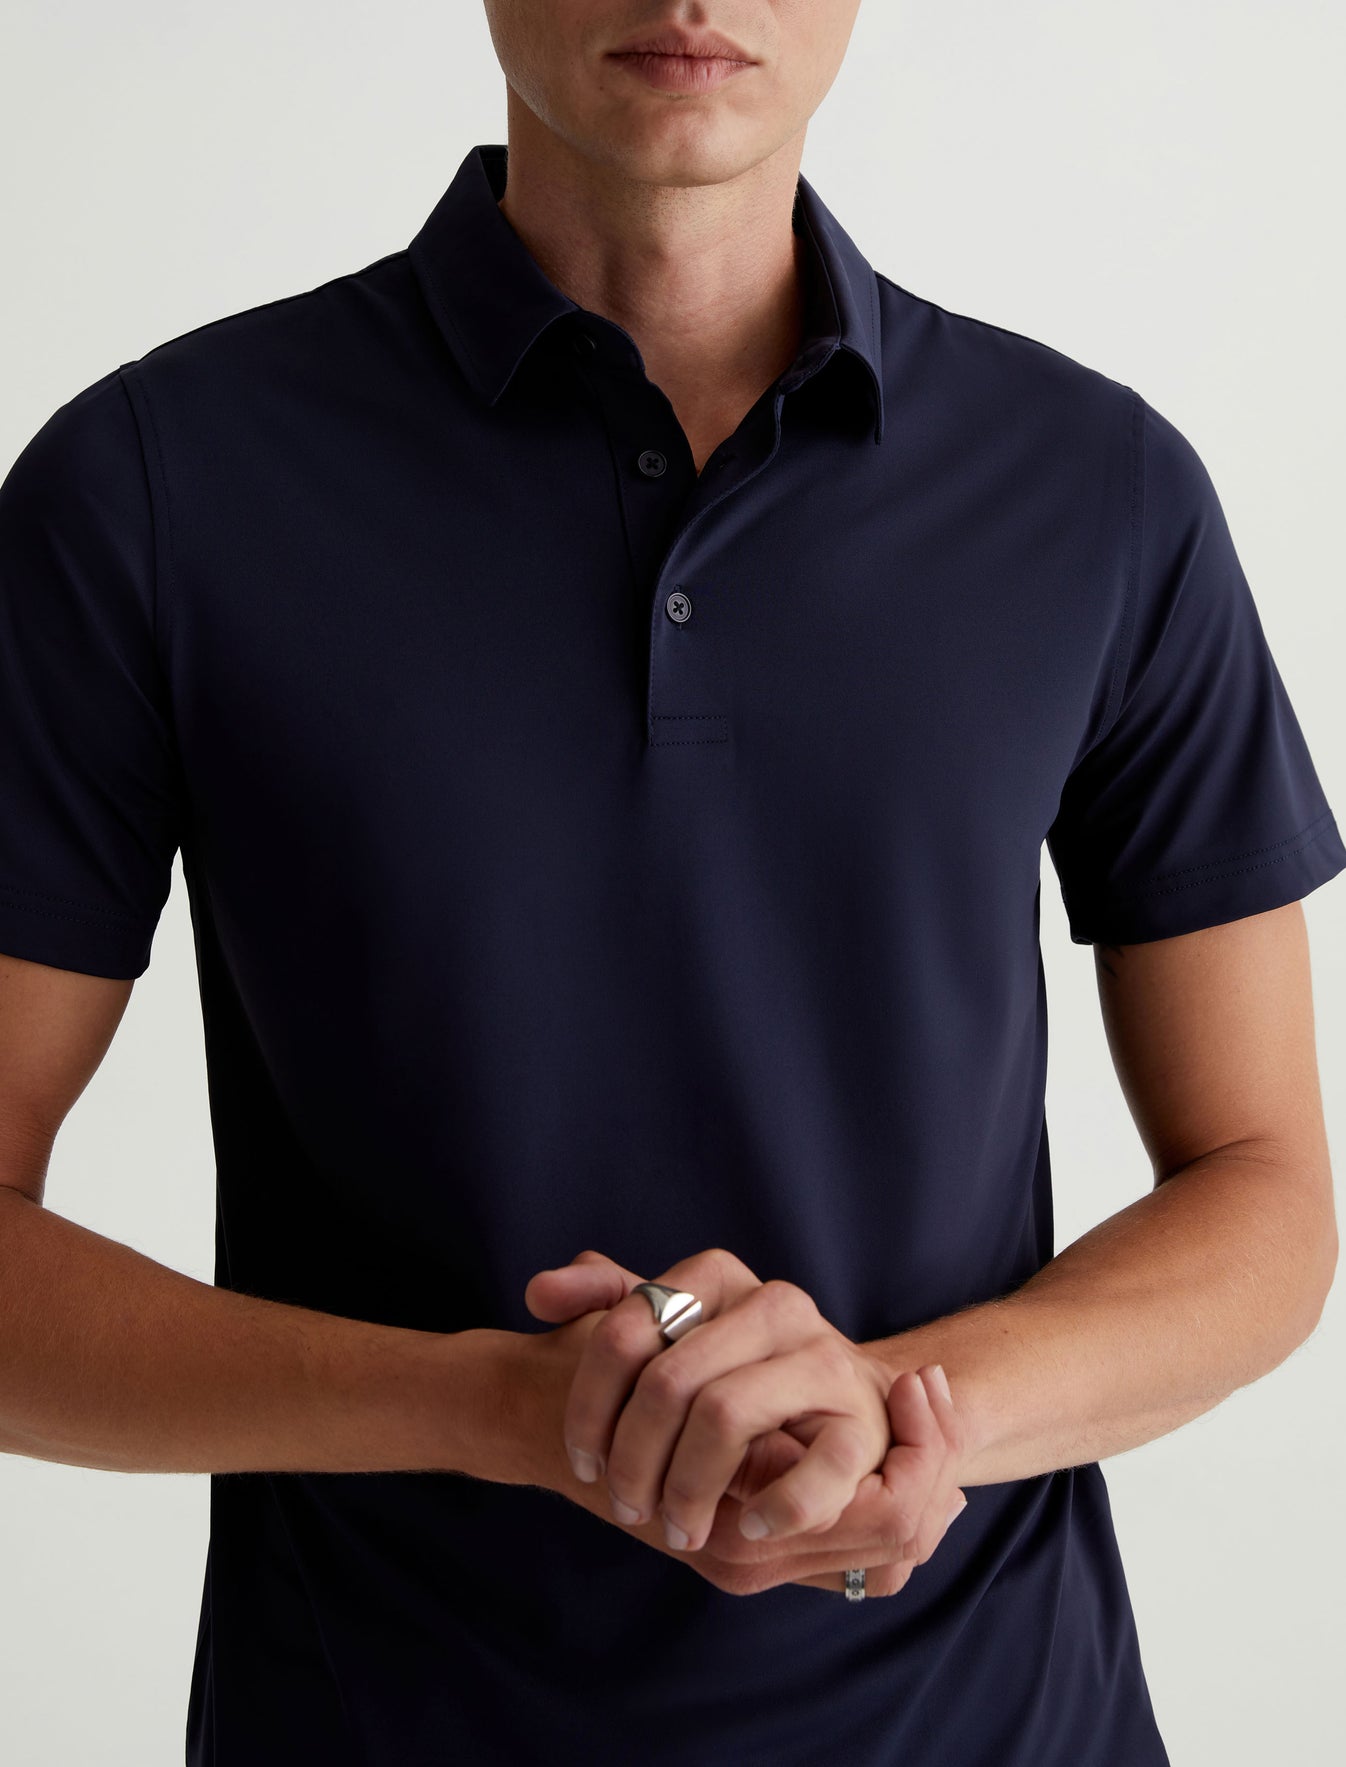 Bryce S/S Polo Deep Navy Classic Fit Short Sleeve Polo T-Shirt Mens Top Photo 2